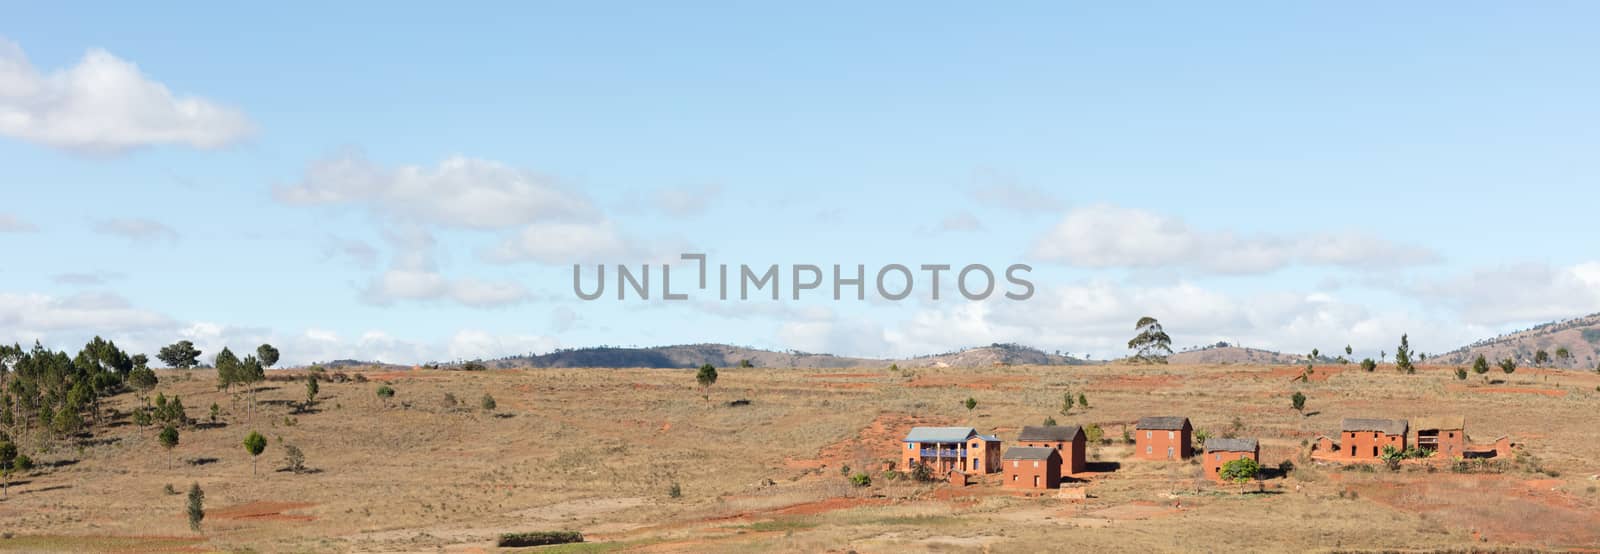 Village and landscape of Madagascar, somewhere between Andasibe and Antsirabe